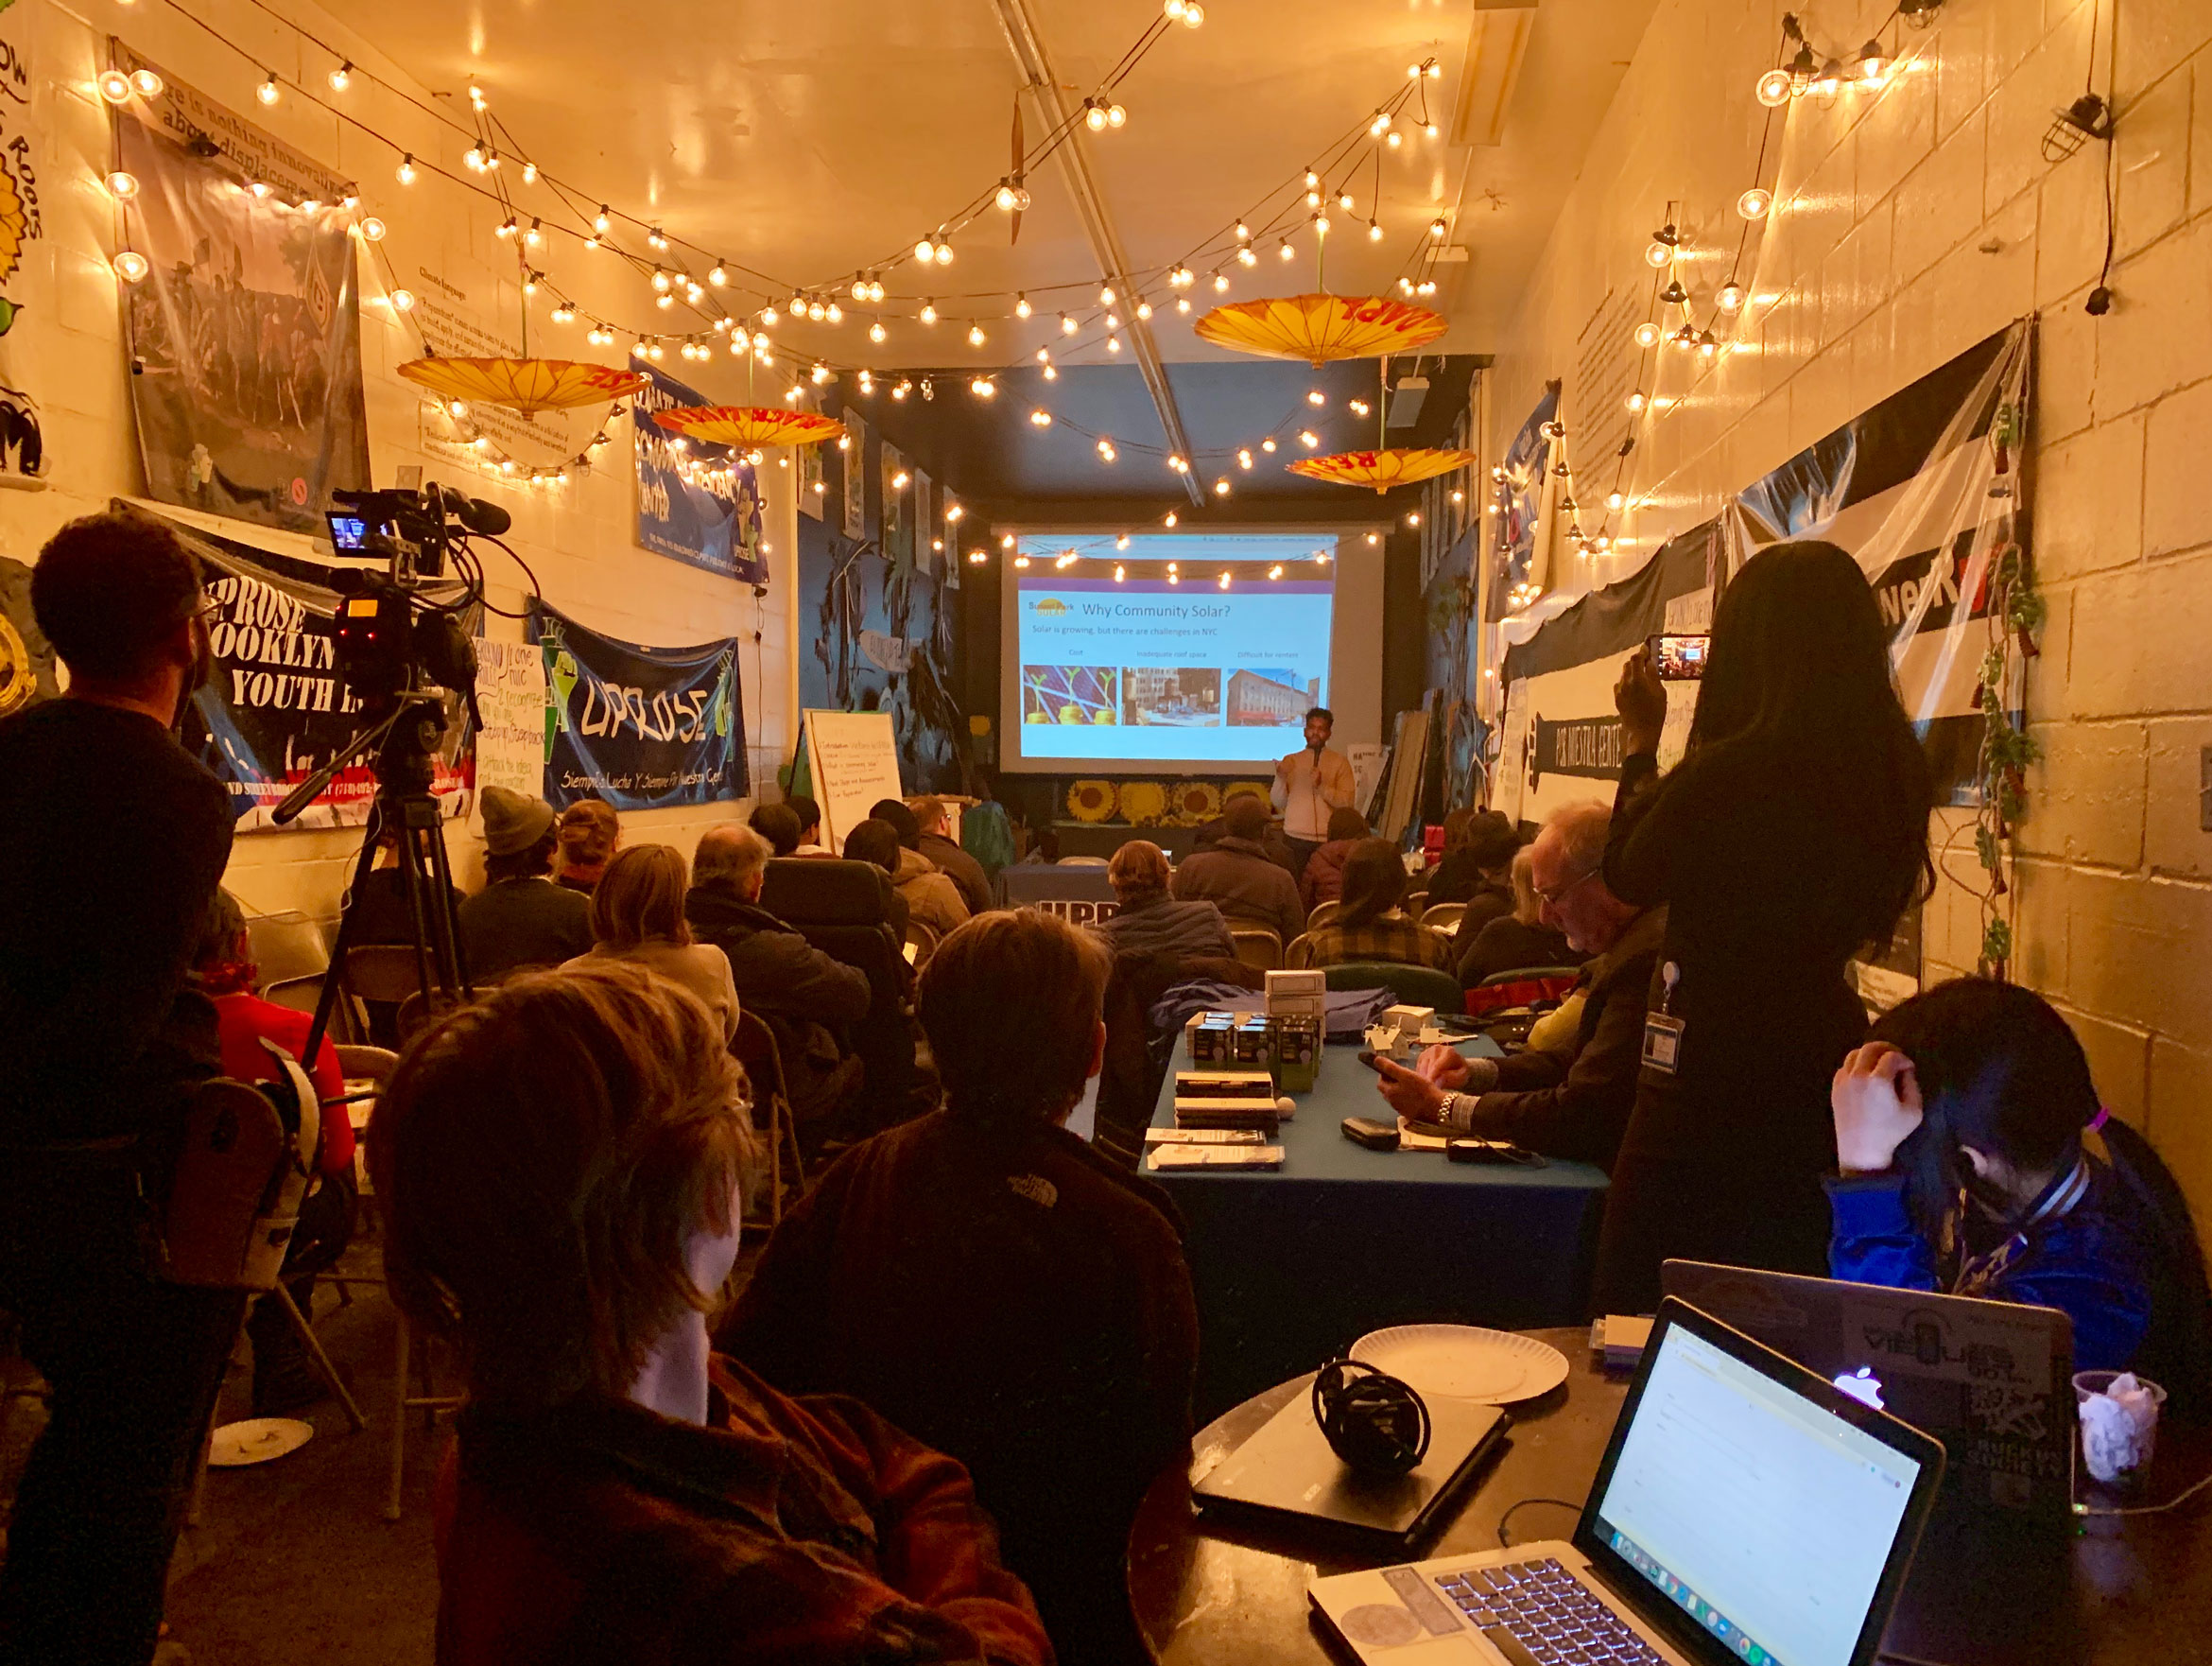 Juan Parra, Community Solar Program Manager at Solar One, addresses members of the Sunset Park community at a March 2019 informational meeting. Image via UPROSE.